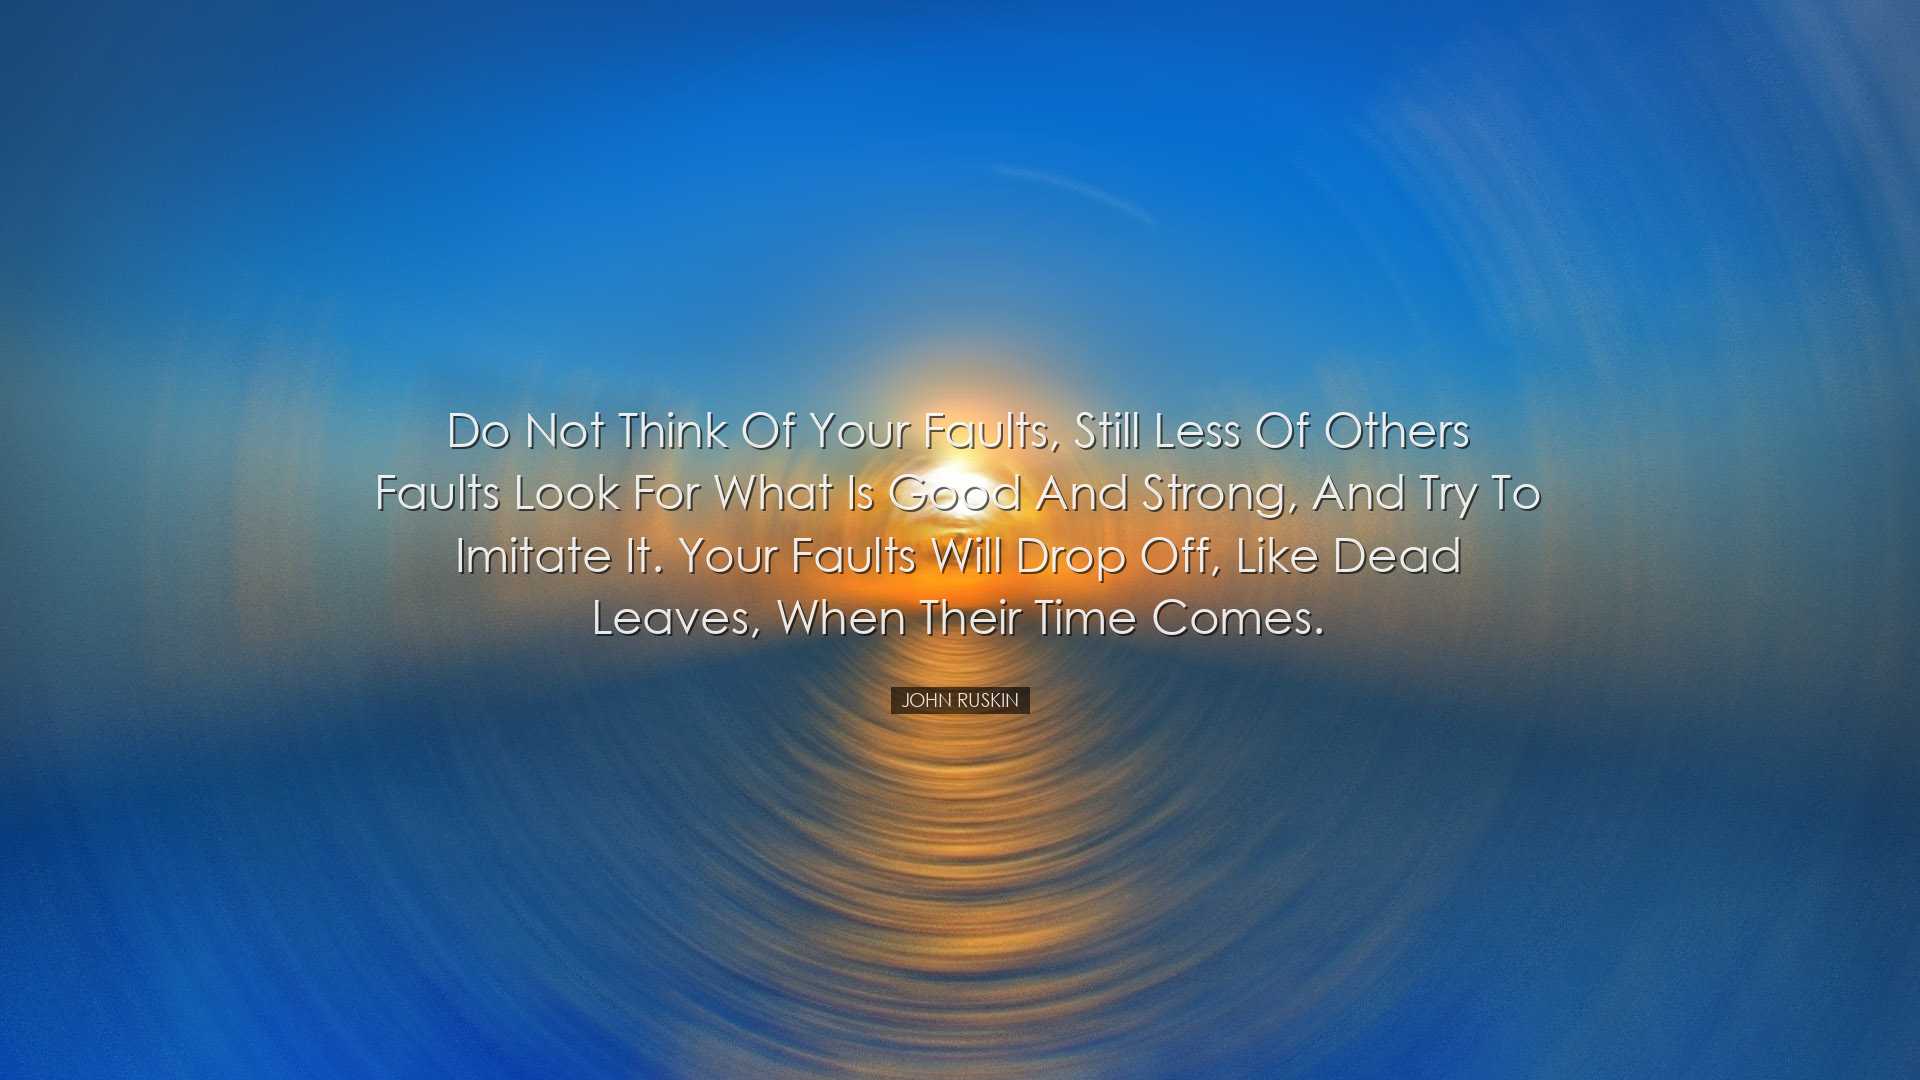 Do not think of your faults, still less of others faults look for